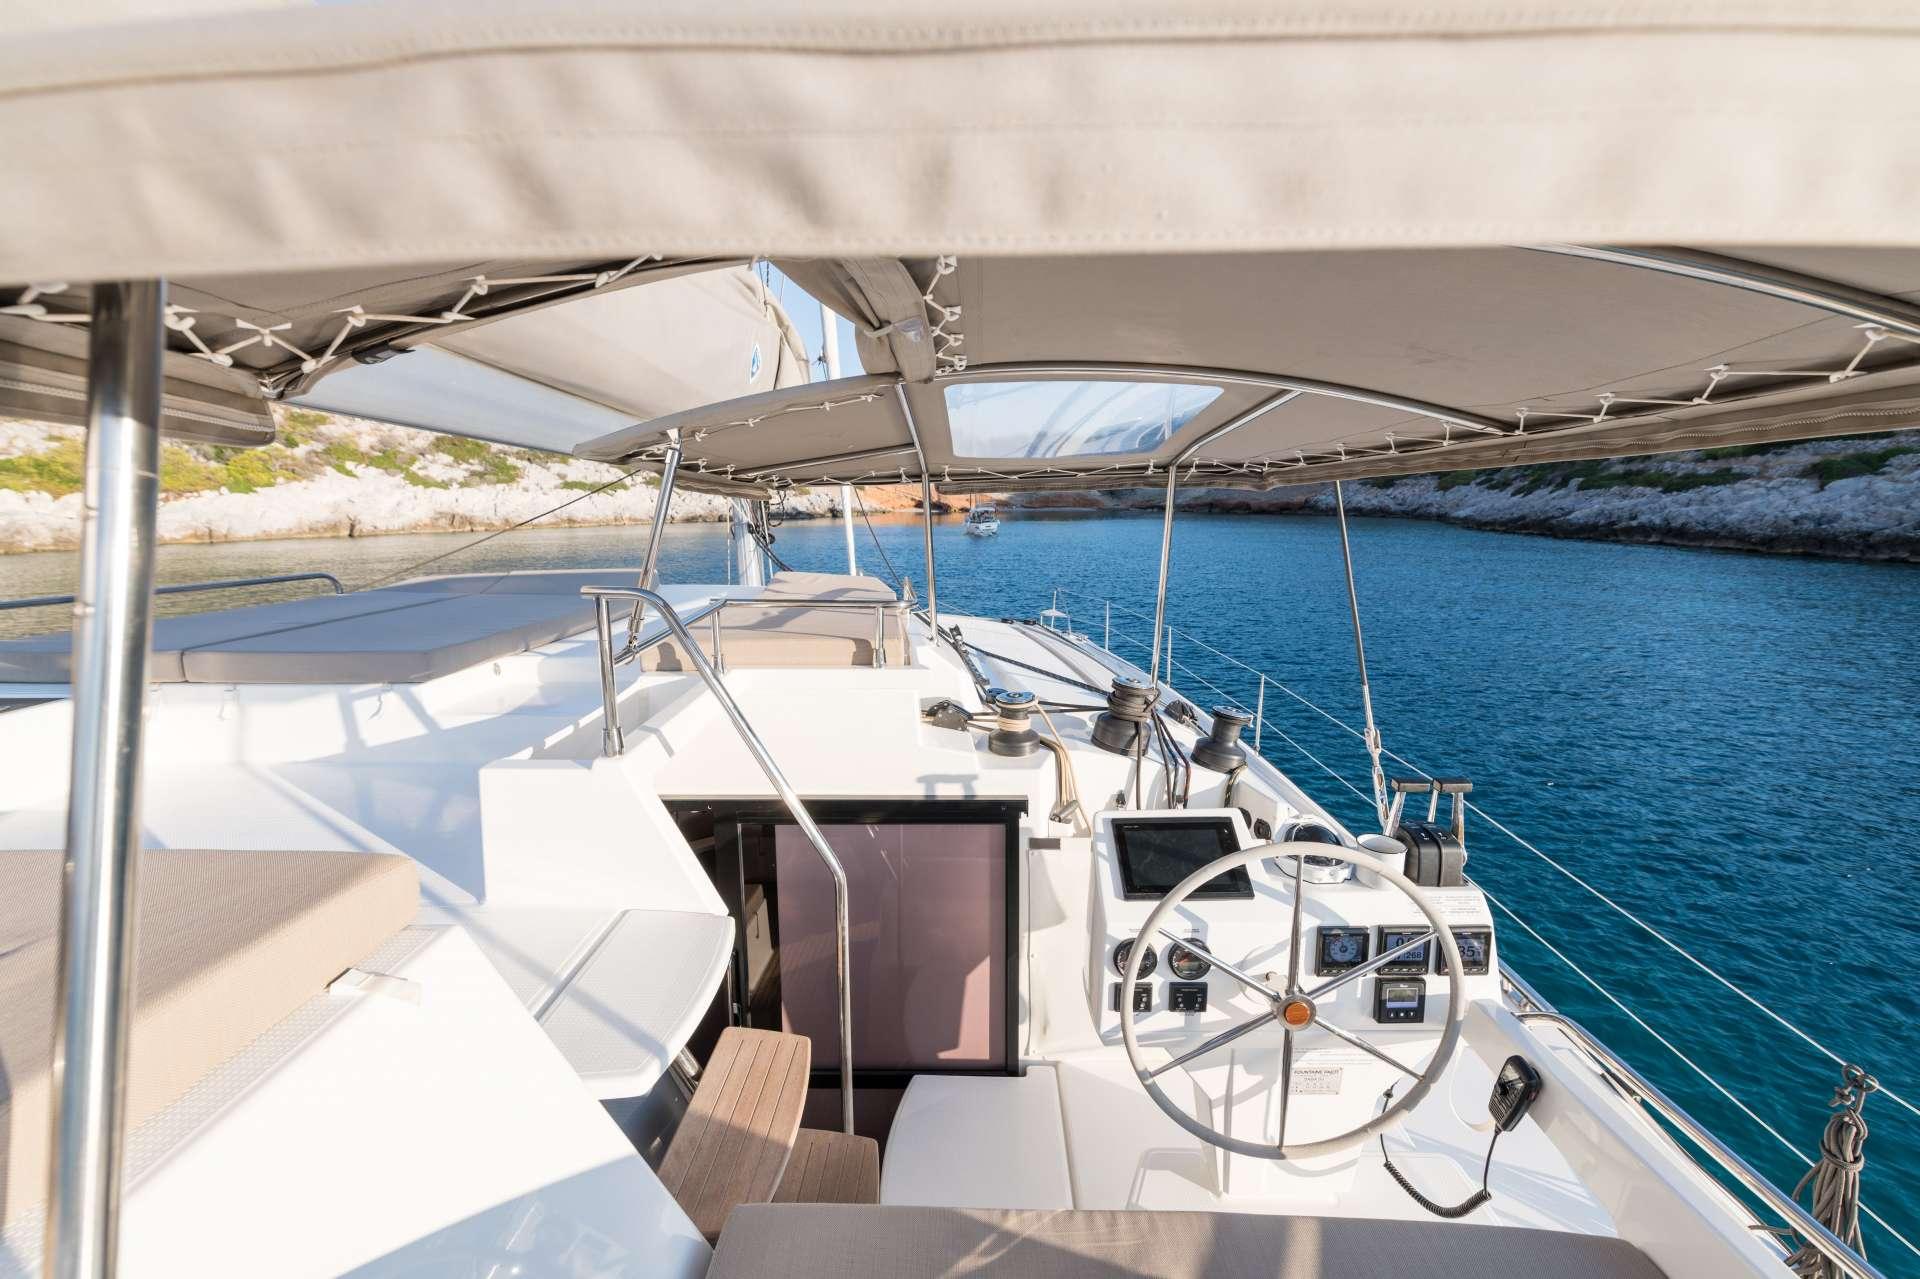 PI 2 Fully Air-Conditioned Catamaran Charter Greece - High Point Yachting